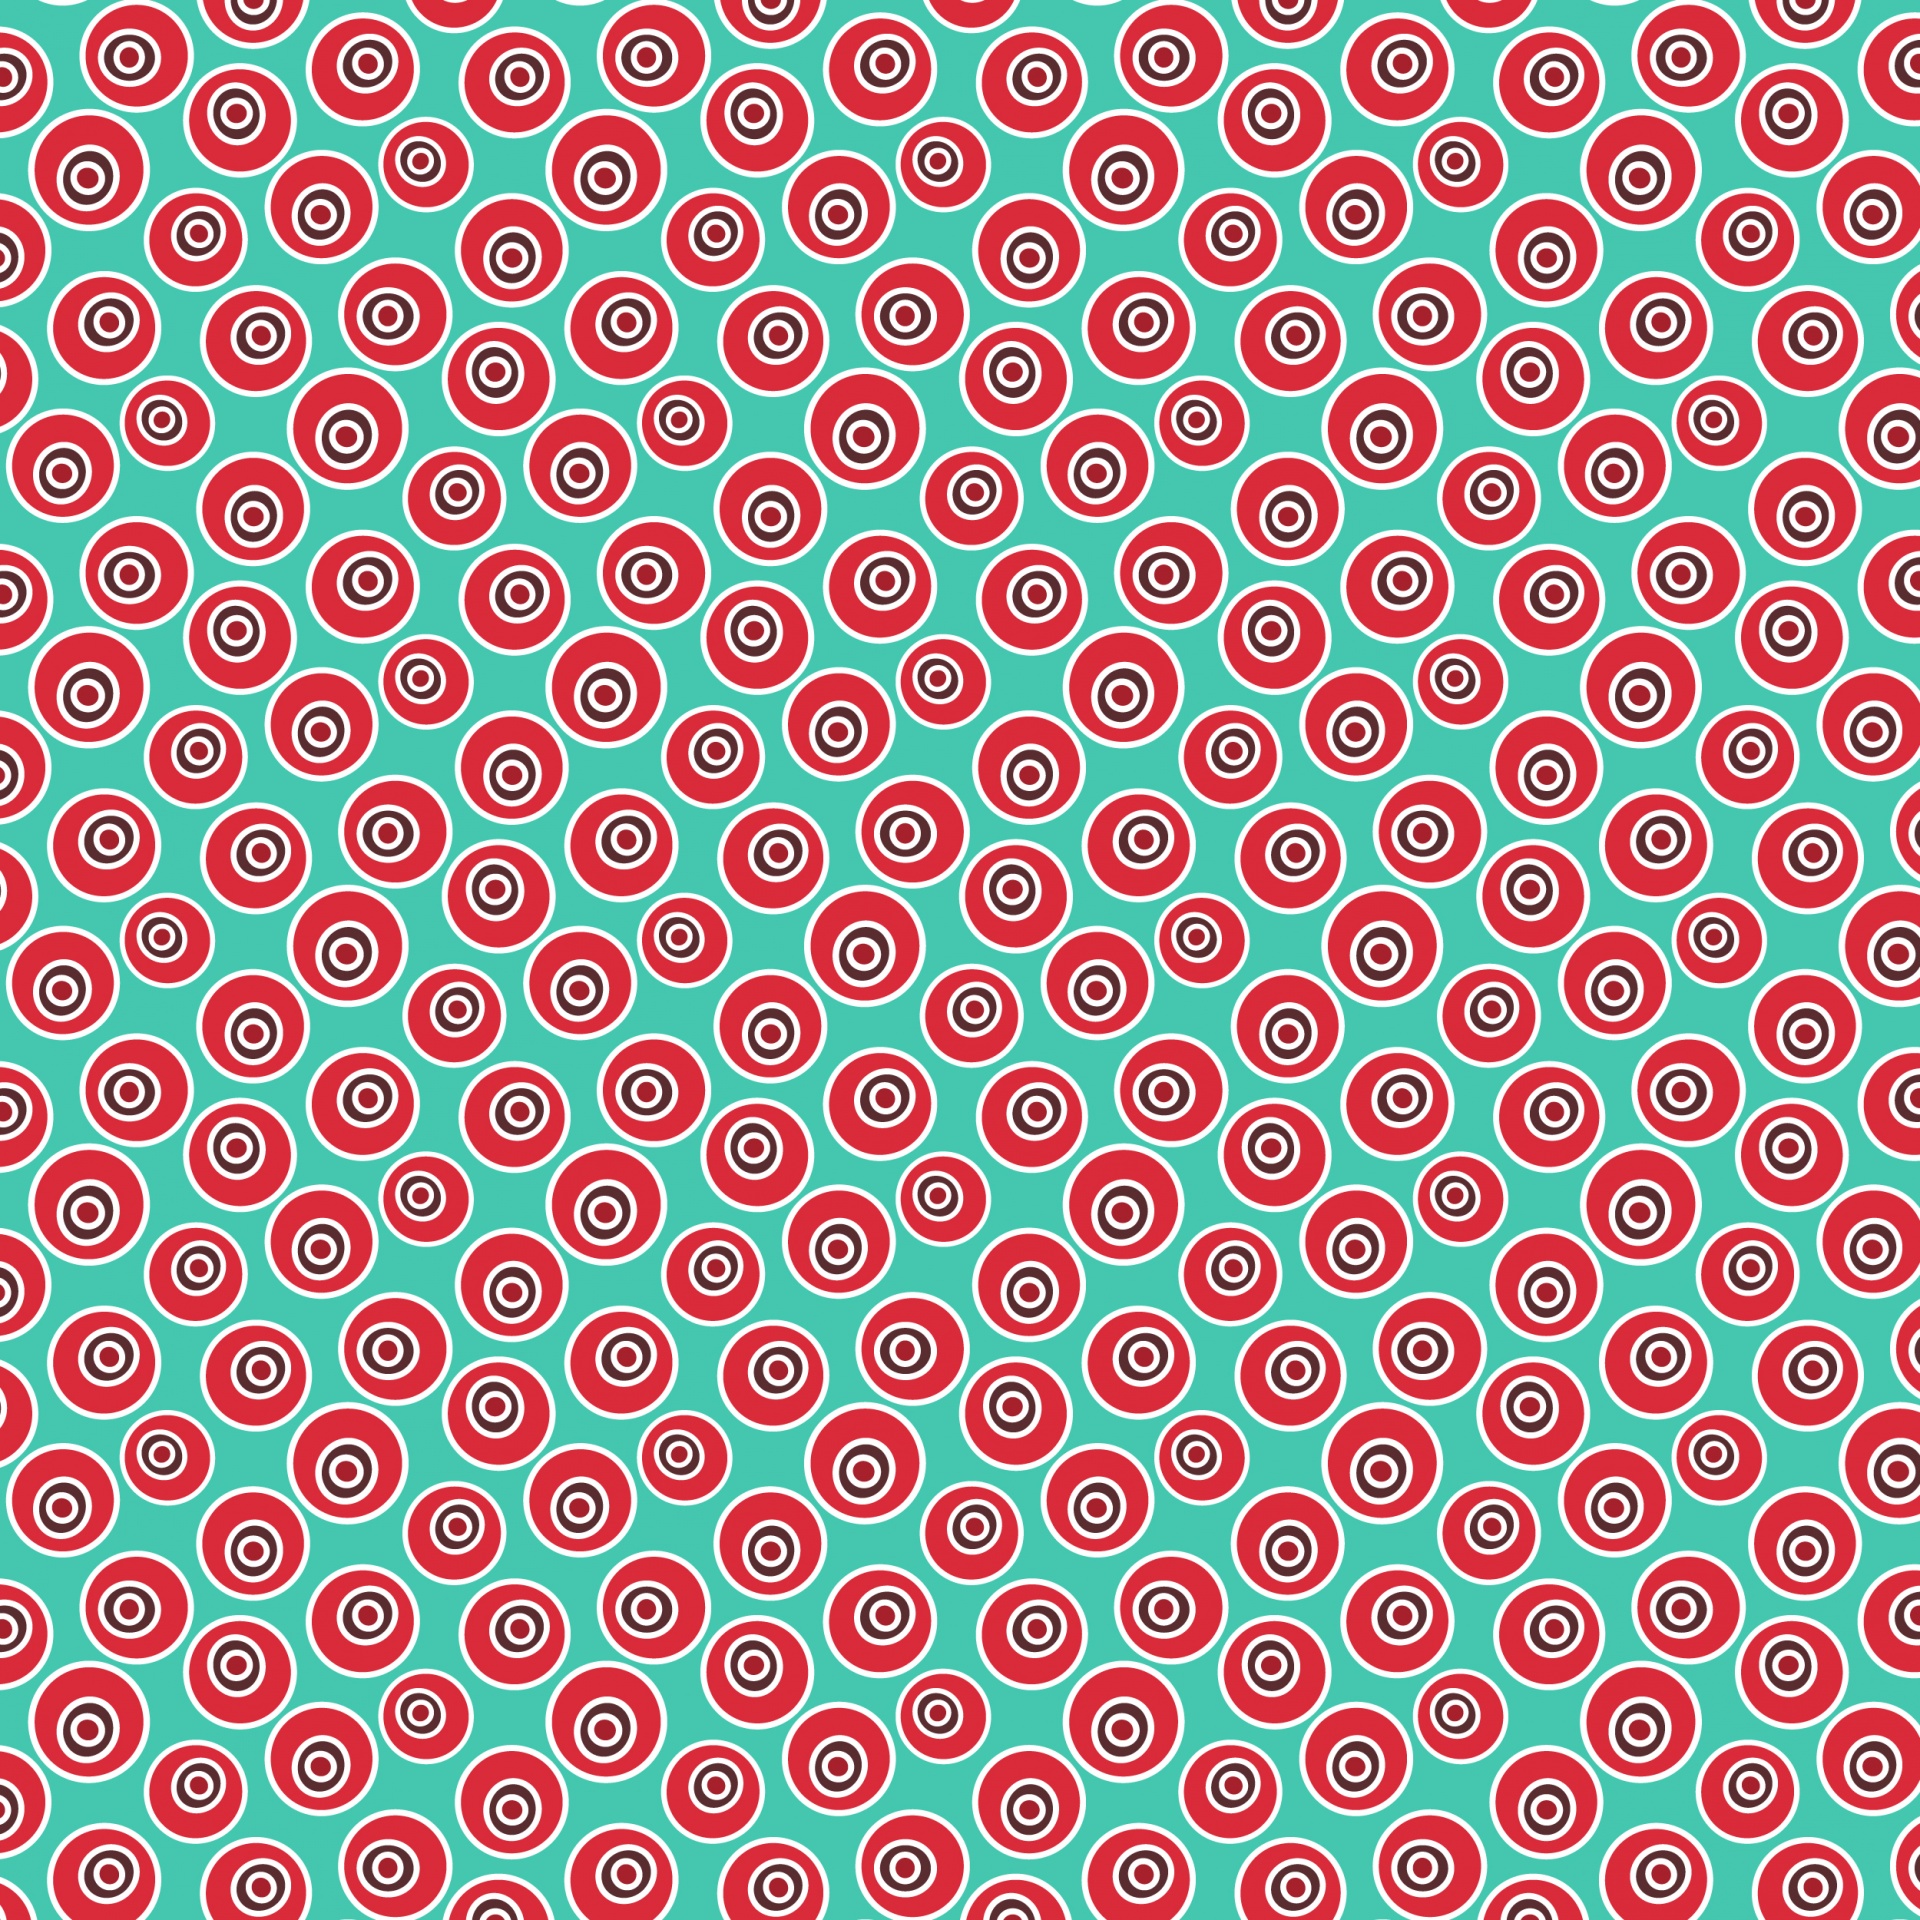 abstract dotted pattern